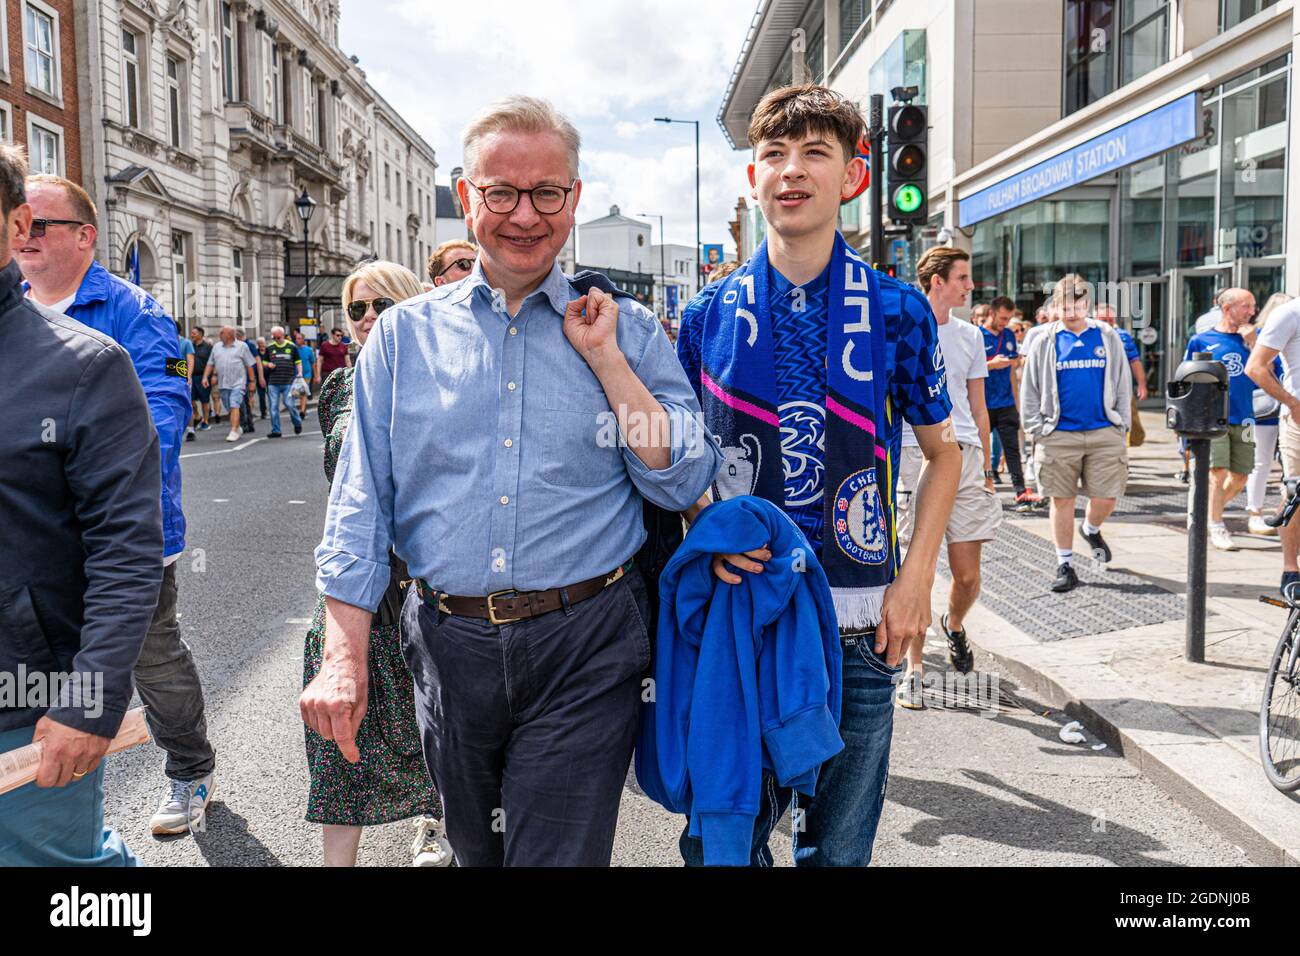 London, UK.14 August 2021. Michael Gove, Chancellor of the Duchy of Lancaster and Minister for the Cabinet Office arrives at Stamford Bridge  on the opening day of the English Premier  League to attend the Chelsea v Crystal Palace match. Football fans are allowed to attend for the first time at full capacity since lockdown restrictions were eased.    Credit amer ghazzal/Alamy Live News Stock Photo